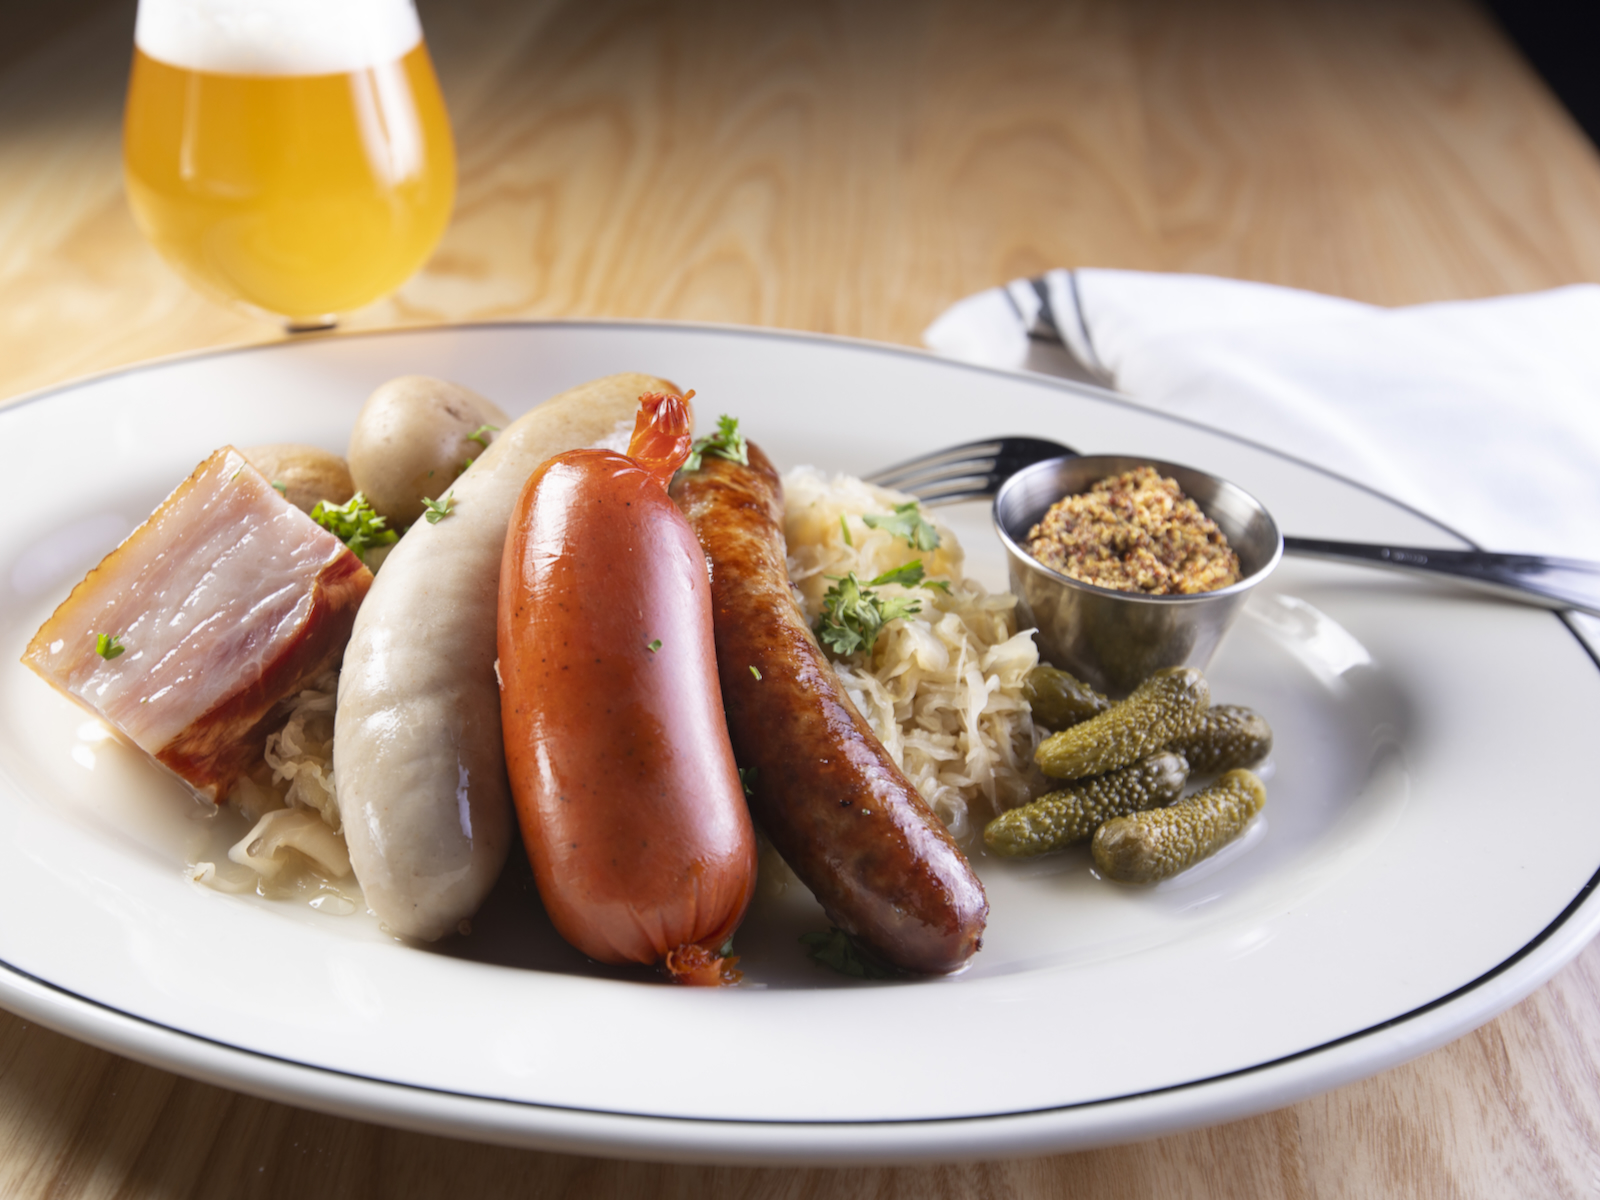 The best of the Wurst dish